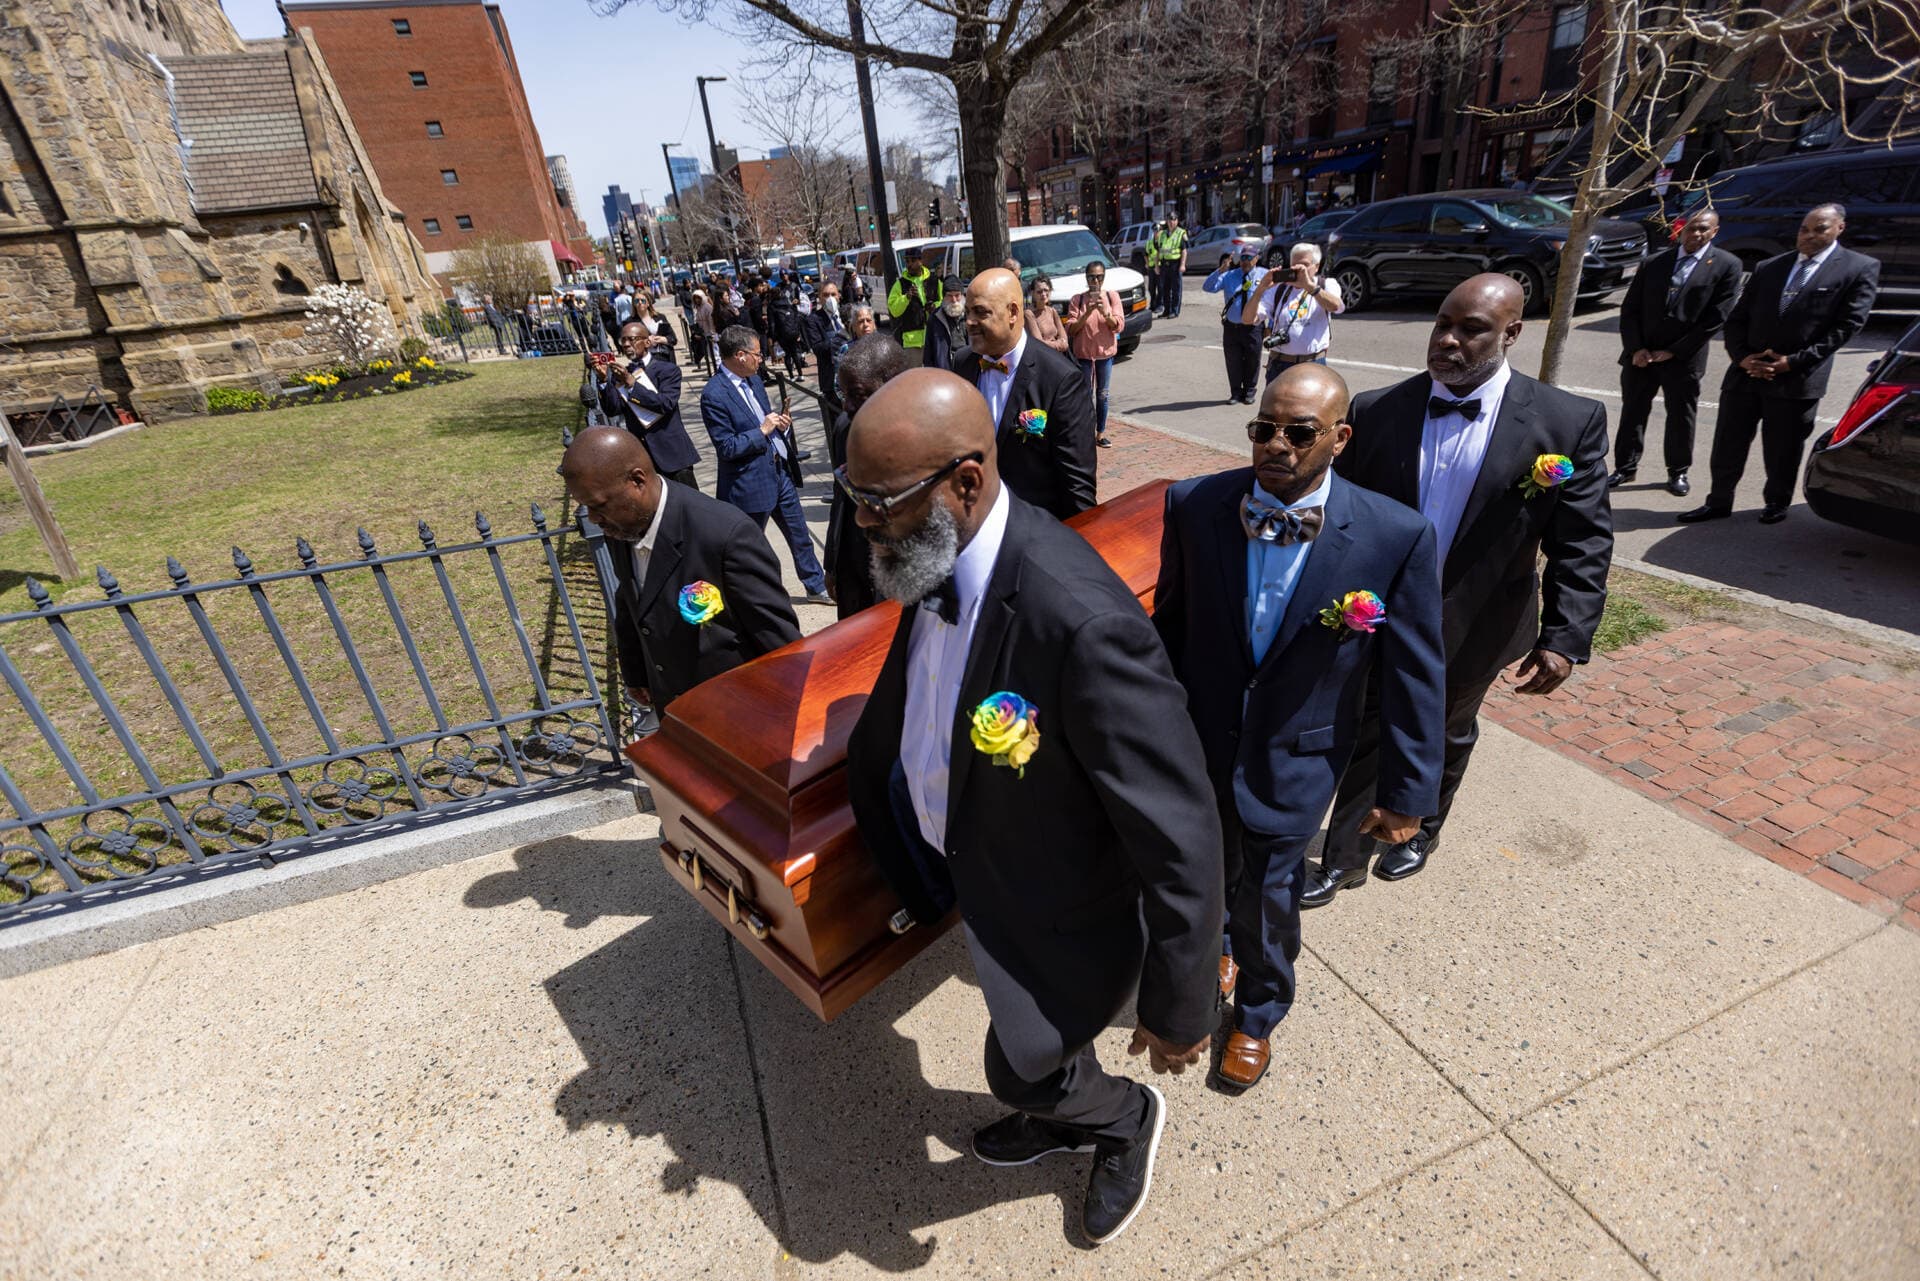 Pallbearers carry the casket of Mel King into the Union United Methodist Church in the South End. (Jesse Costa/WBUR)